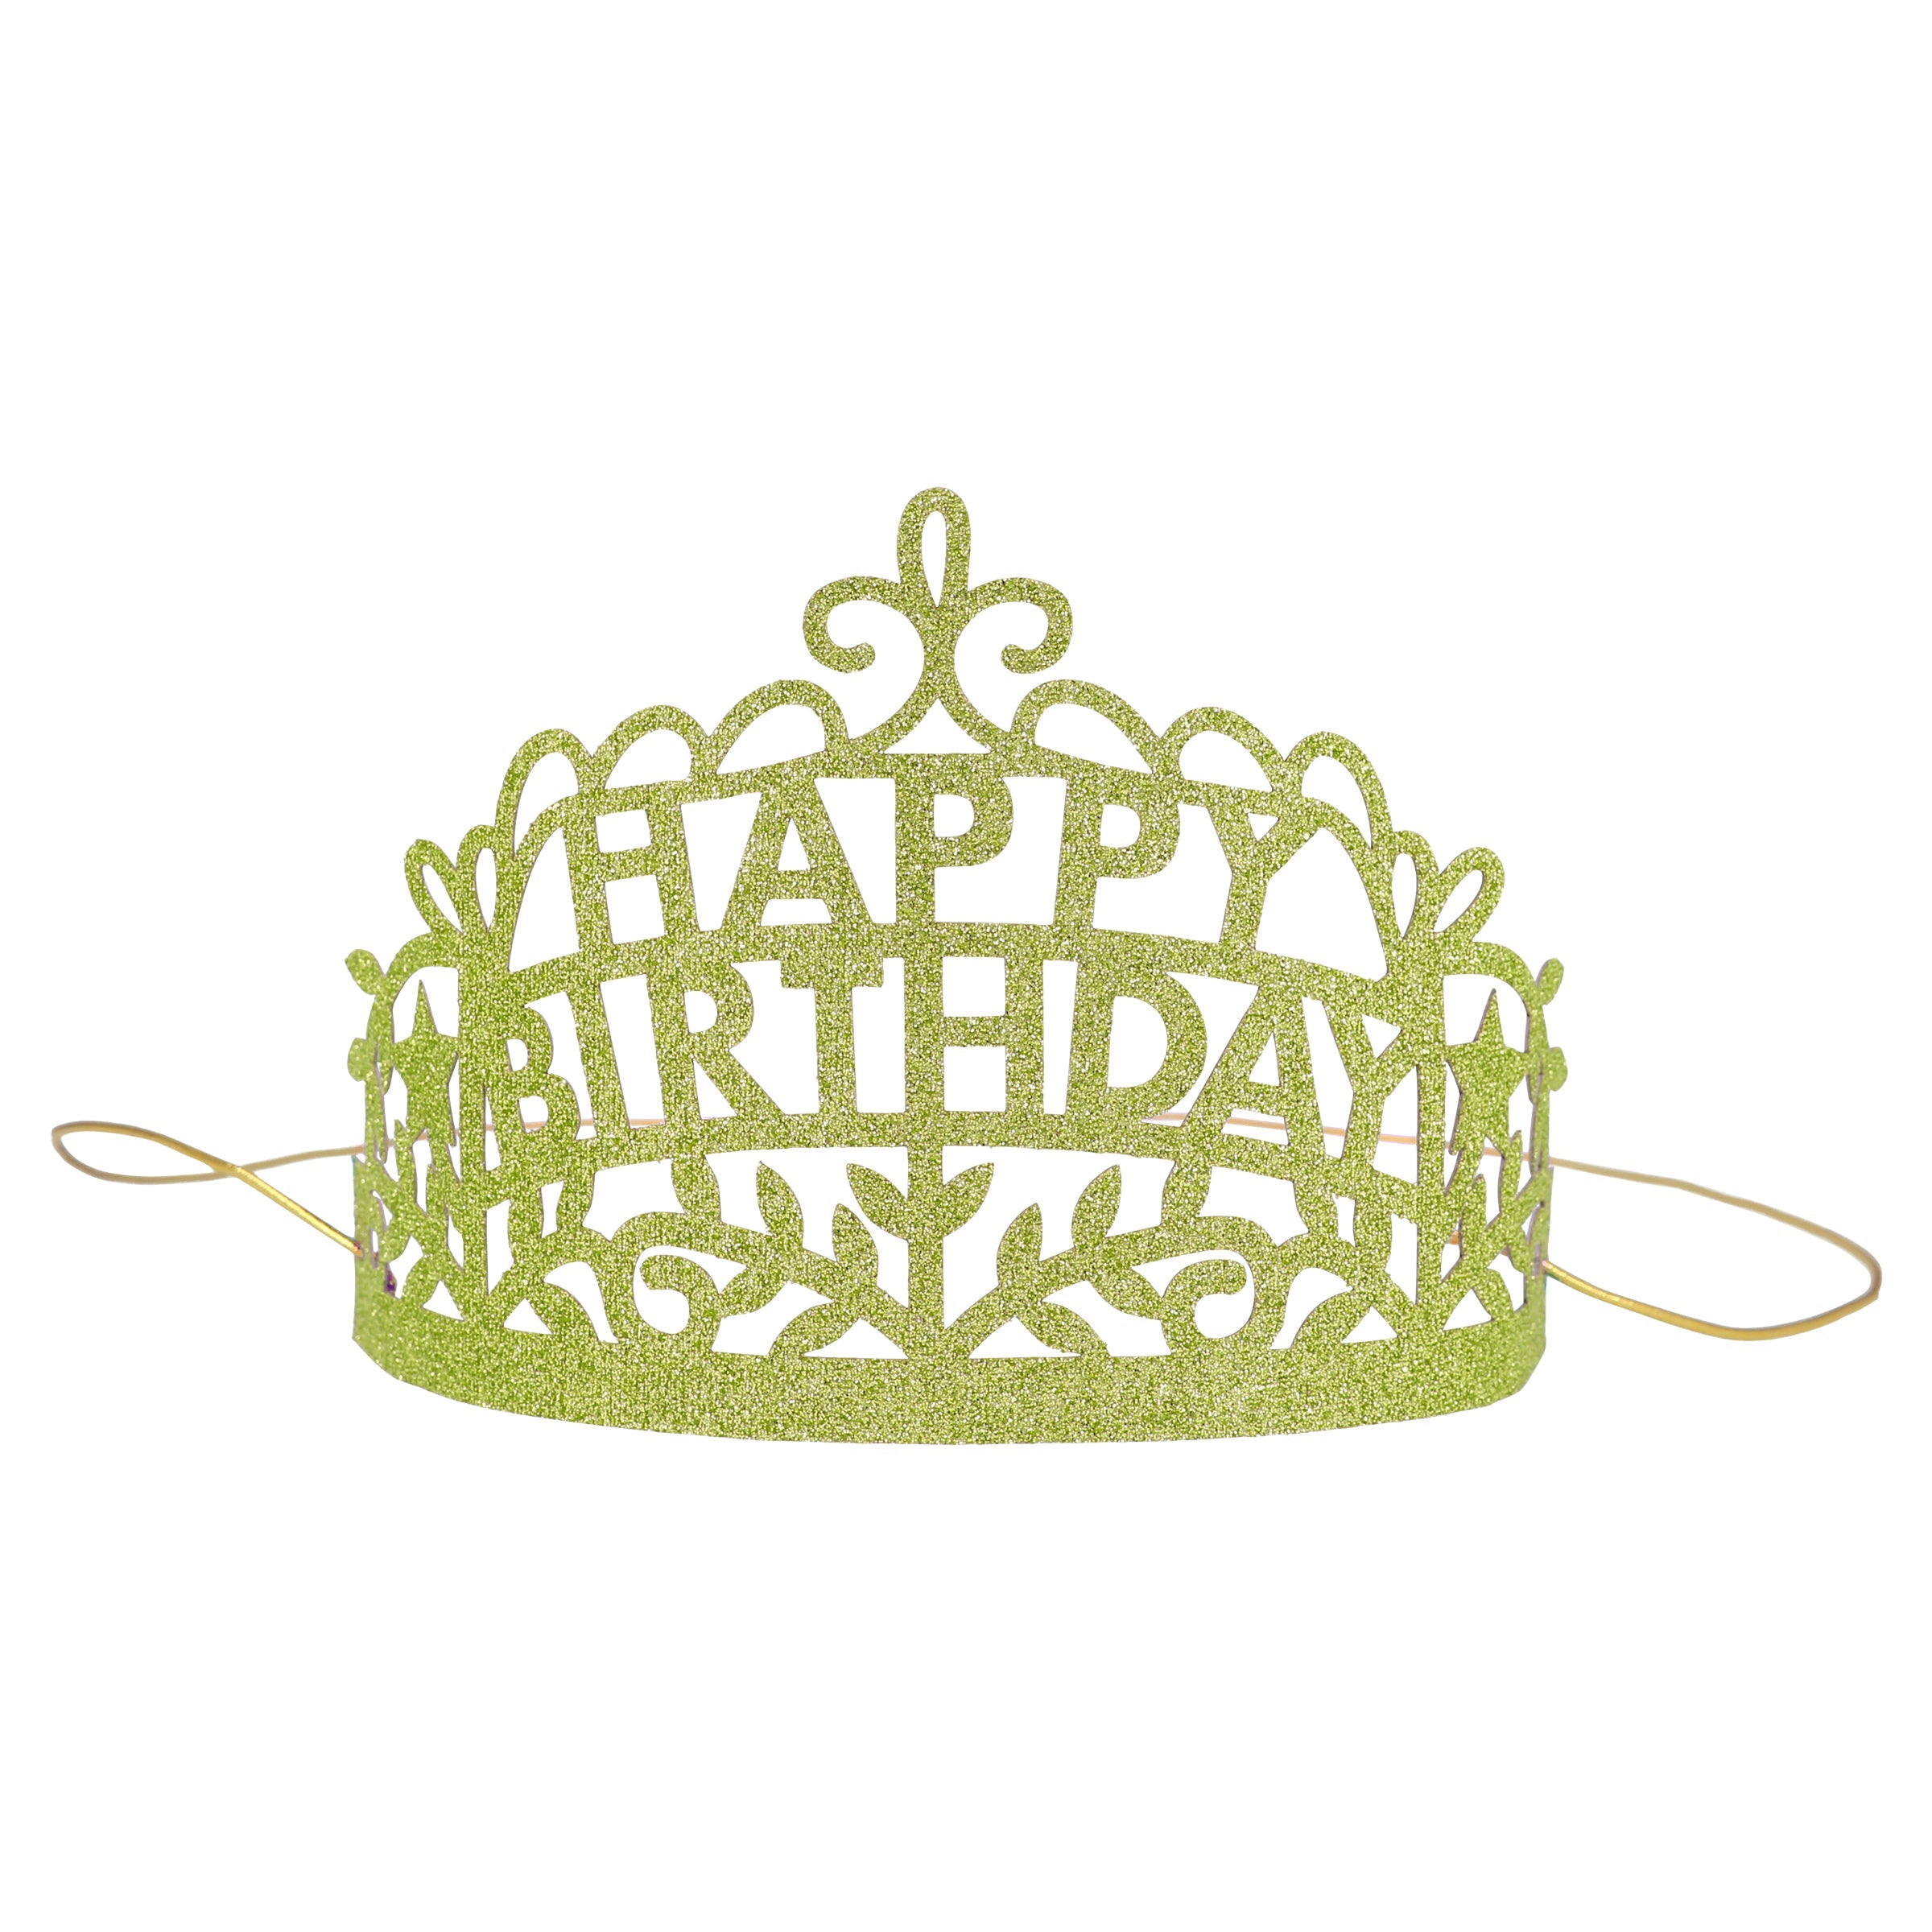 Our princess tiara, a party hat alternative, with lots of glitter is ideal for a princess party or fairy party.